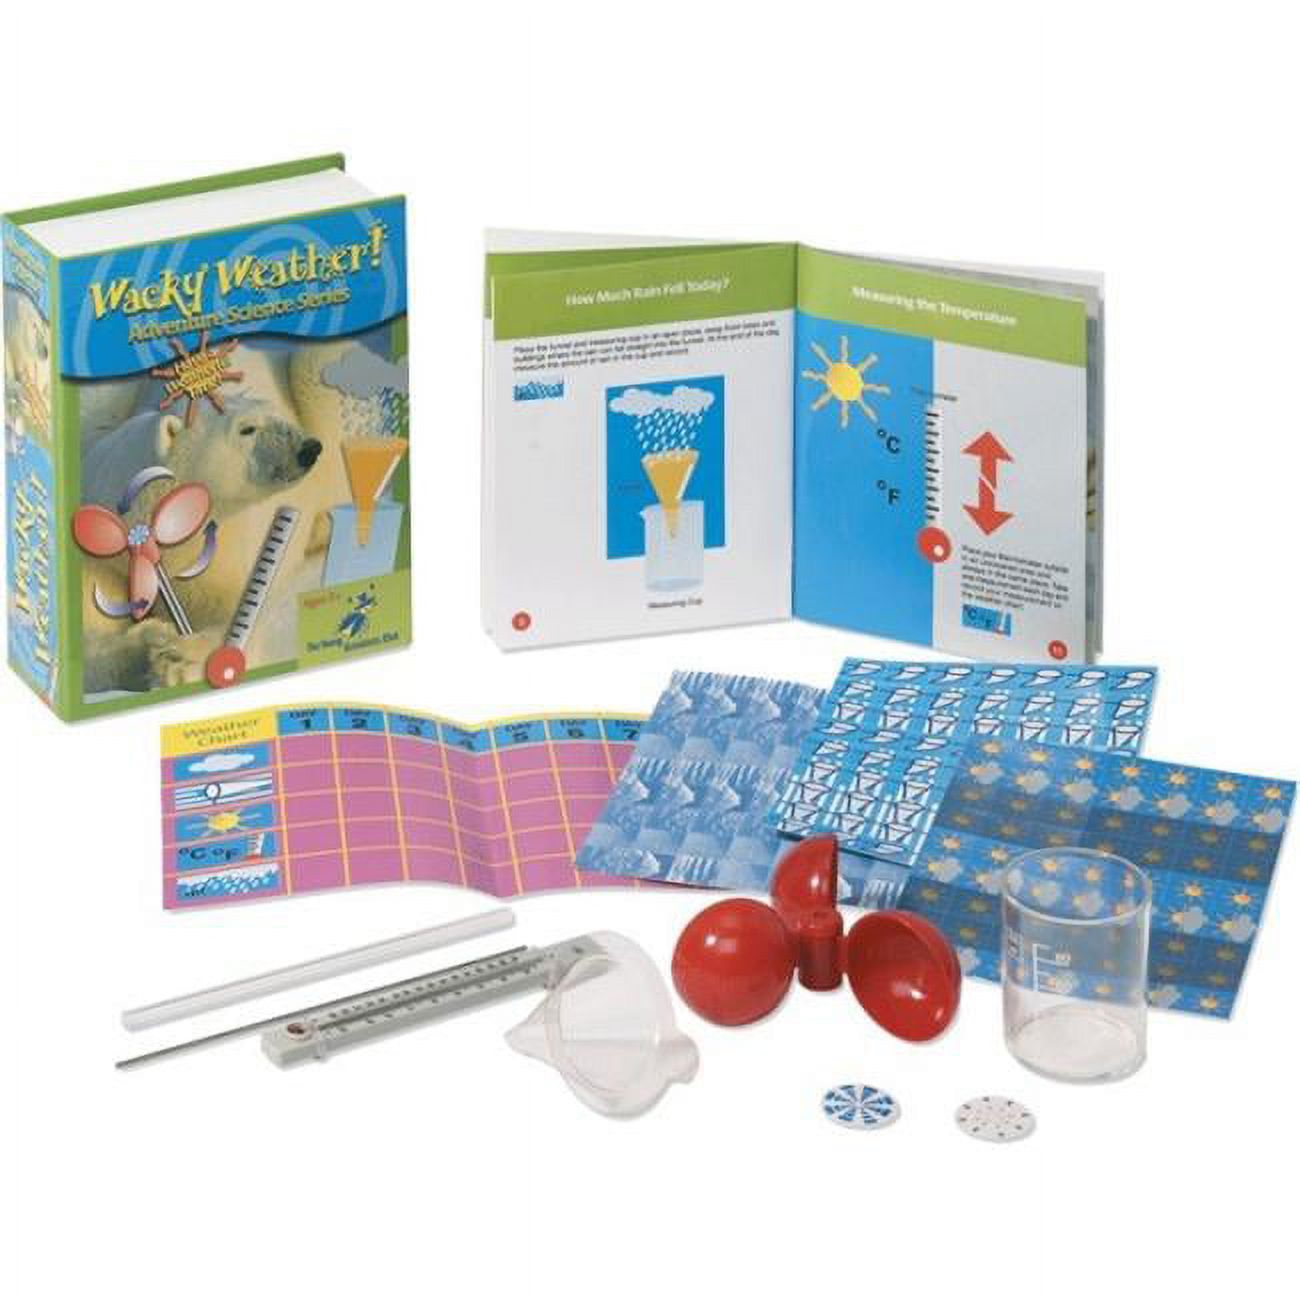 The Young Scientists Club WH-925-1116 Adventure Science Series- Wacky Weather Kit - image 1 of 1